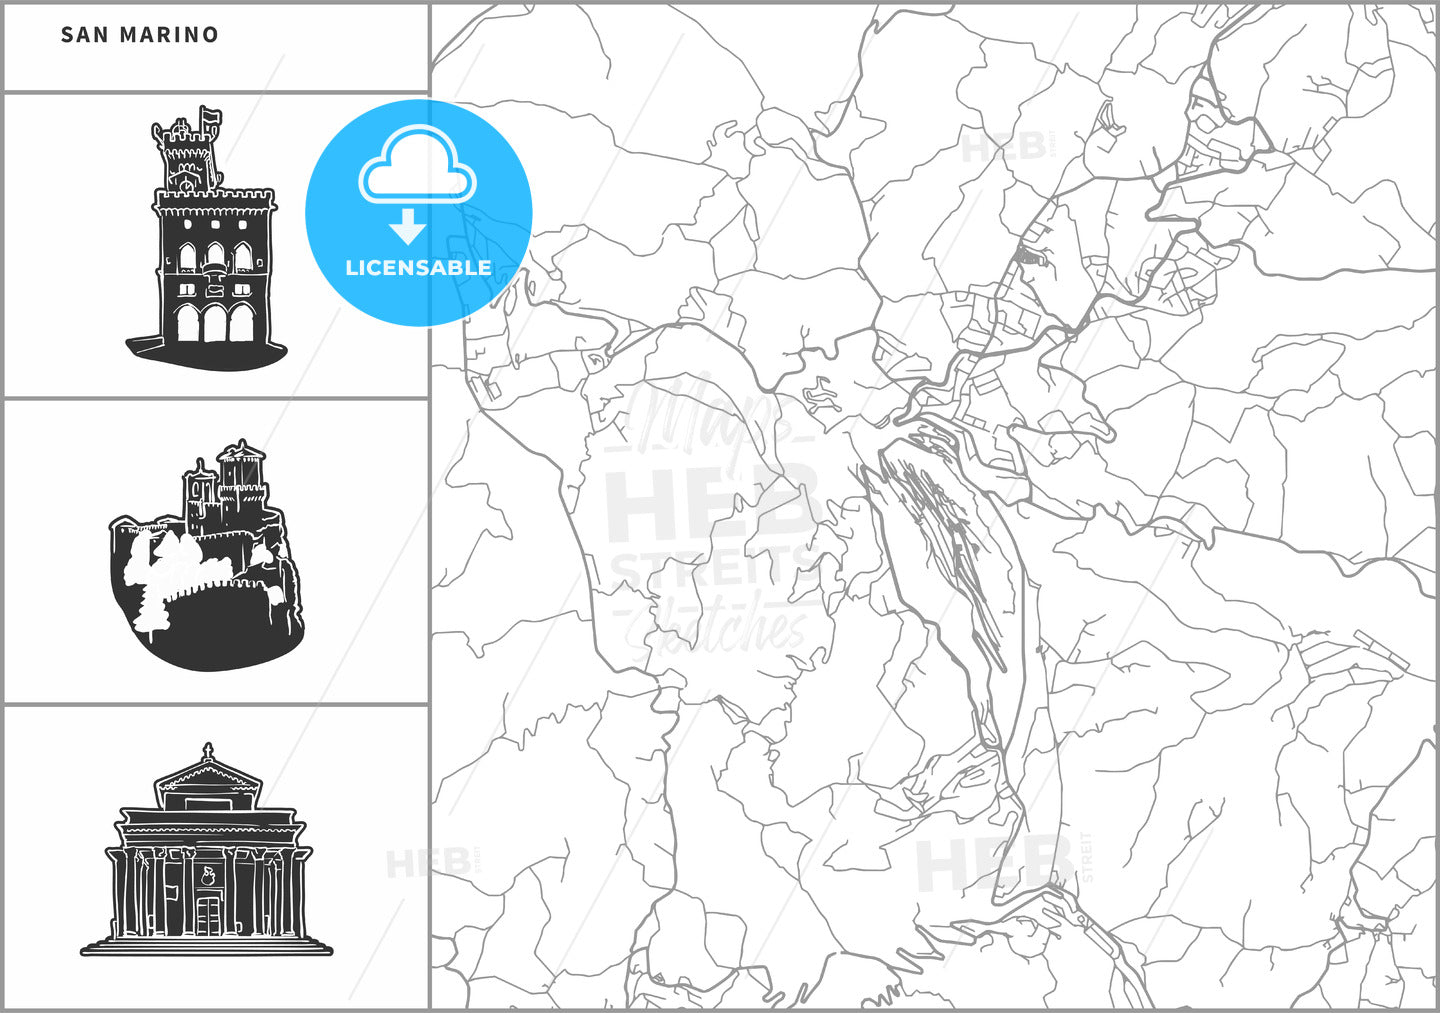 San Marino city map with hand-drawn architecture icons